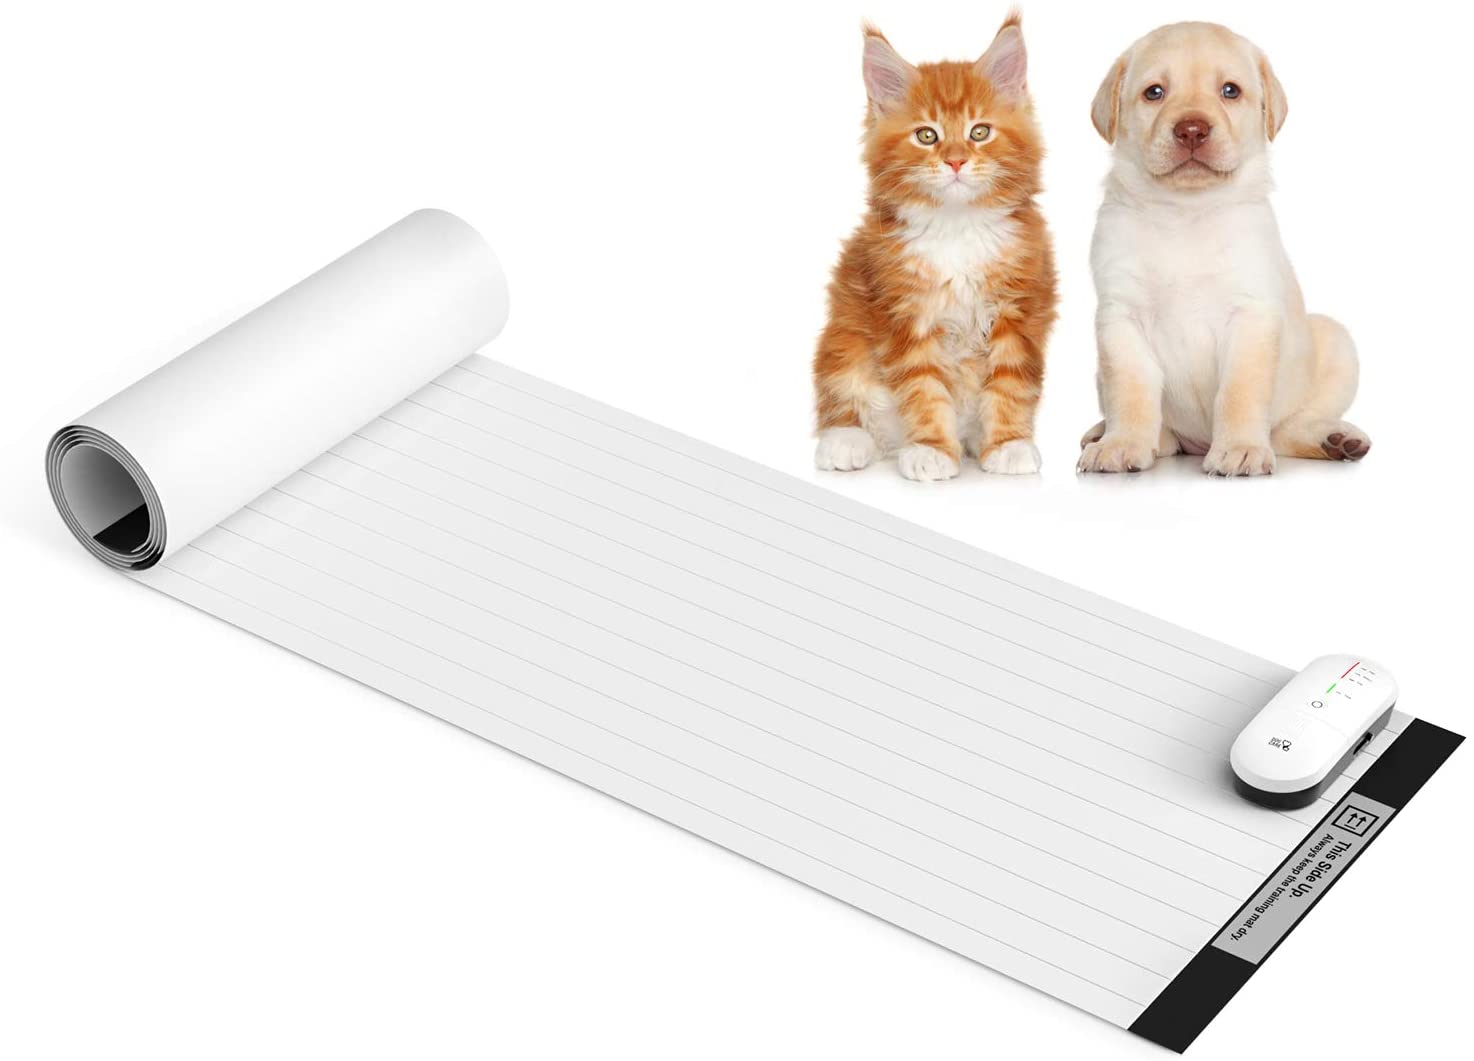 60”x12” Pet Training Mat for Cats & Dogs, 3 Training Modes Pet Shock Pad, Indoor Use Dogs & Cats Training Mat for Sofa w/LED Indicator